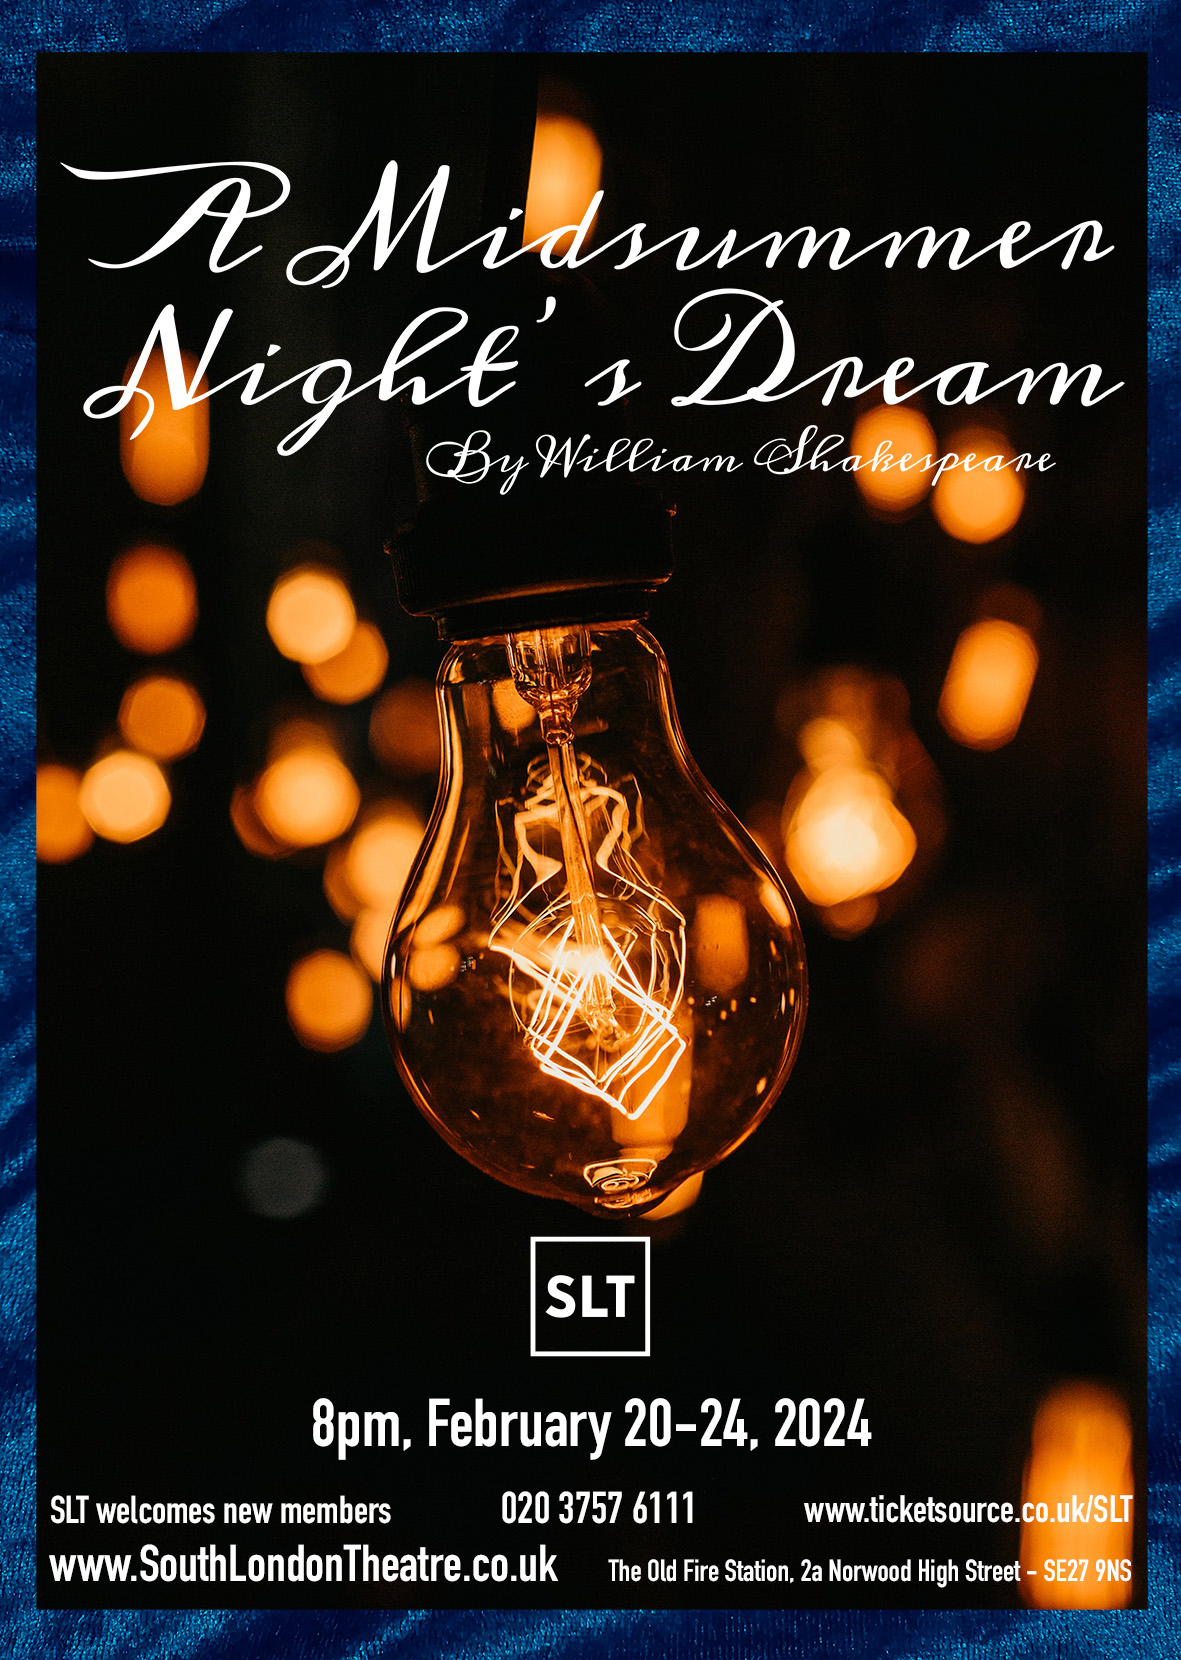 Poster for A Midsummer Night's Dream